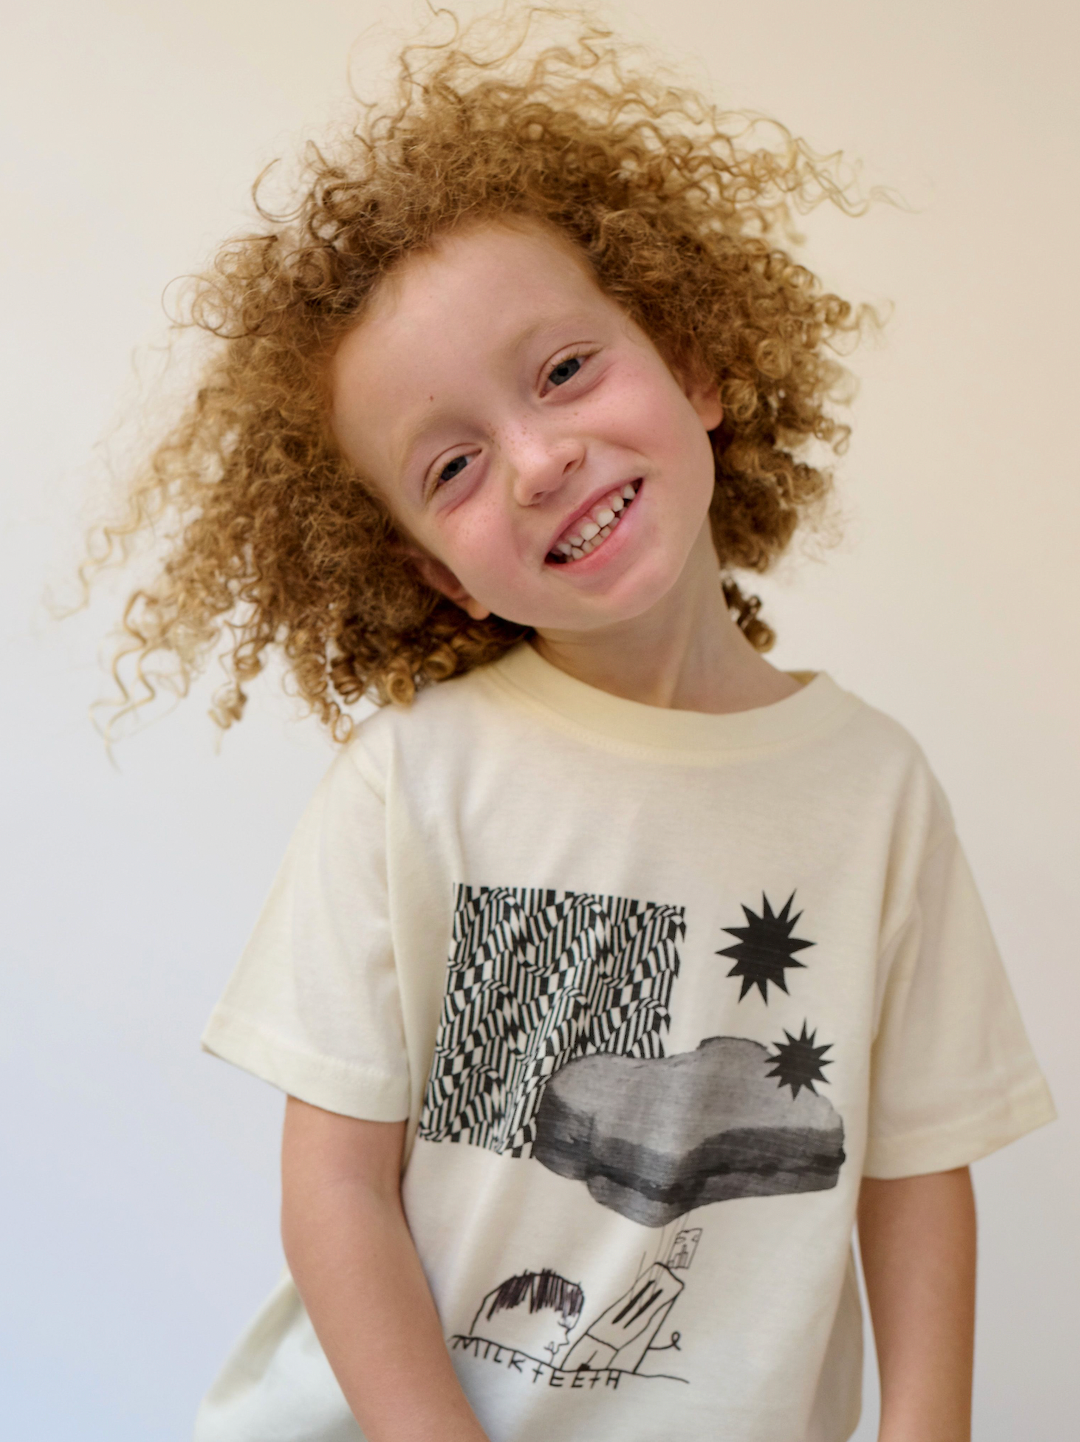 A smiling child wearing a kids' tee shirt in cream, printed in black with stars, zigzags, a PBJ sandwich, a toaster and the words Milk Teeth